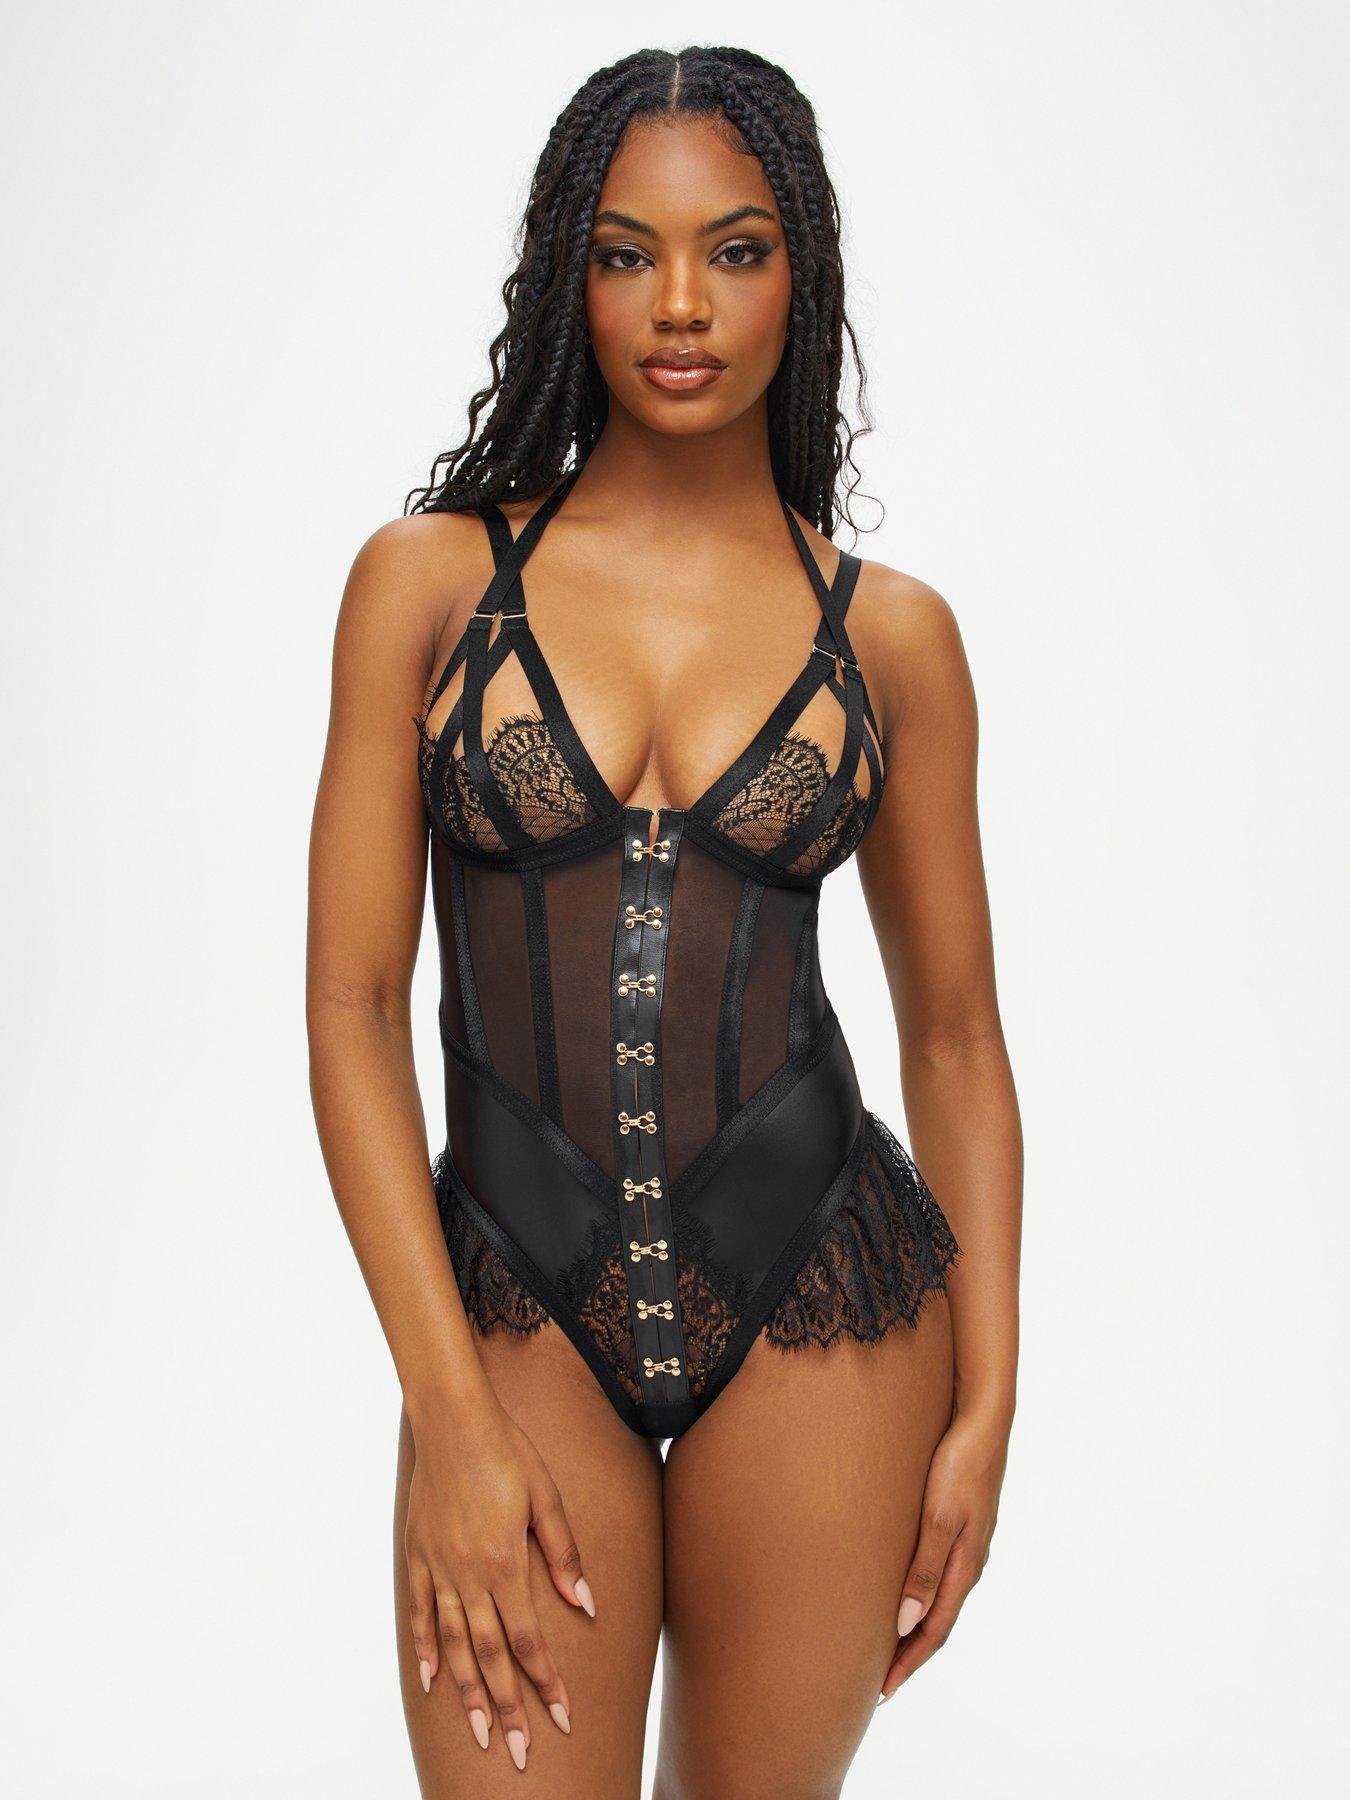  Women Sexy Teddy Lingeries Eyelash Lace Spaghetti Strap  Bodysuits Rompers Black L: Clothing, Shoes & Jewelry